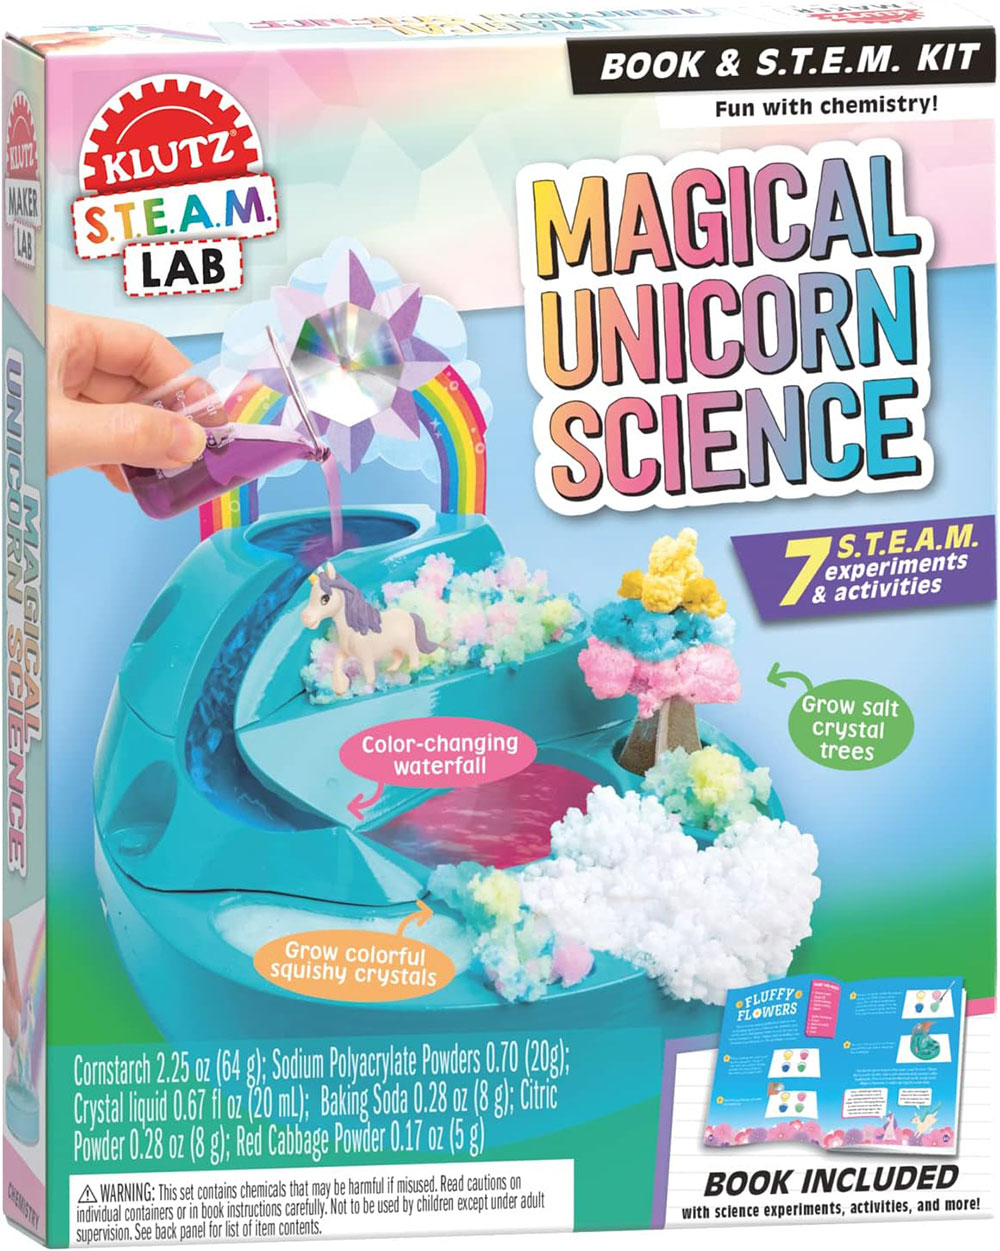 Box art for the Magical Unicorn Science kit